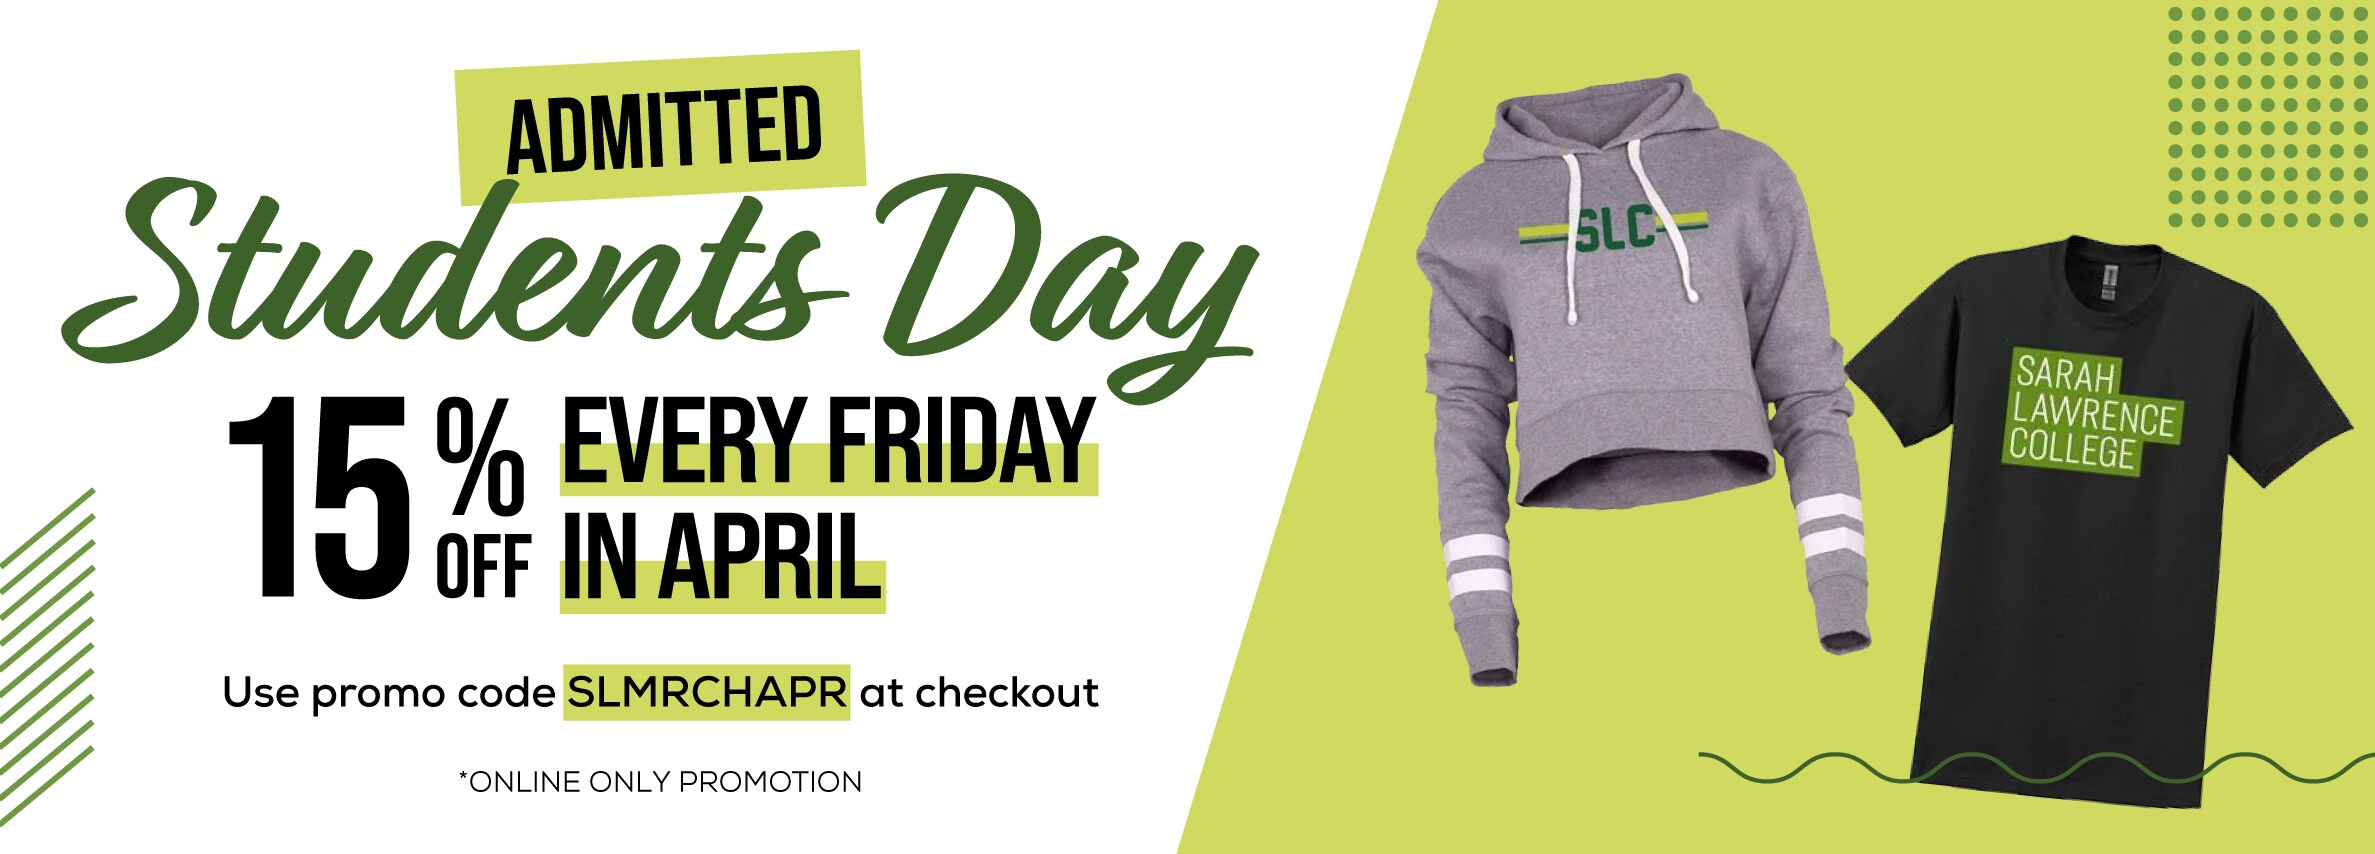 Admitted Students Day: Enjoy 15% off online purchases every Friday in April! Use code SLMRCHAPR at checkout.